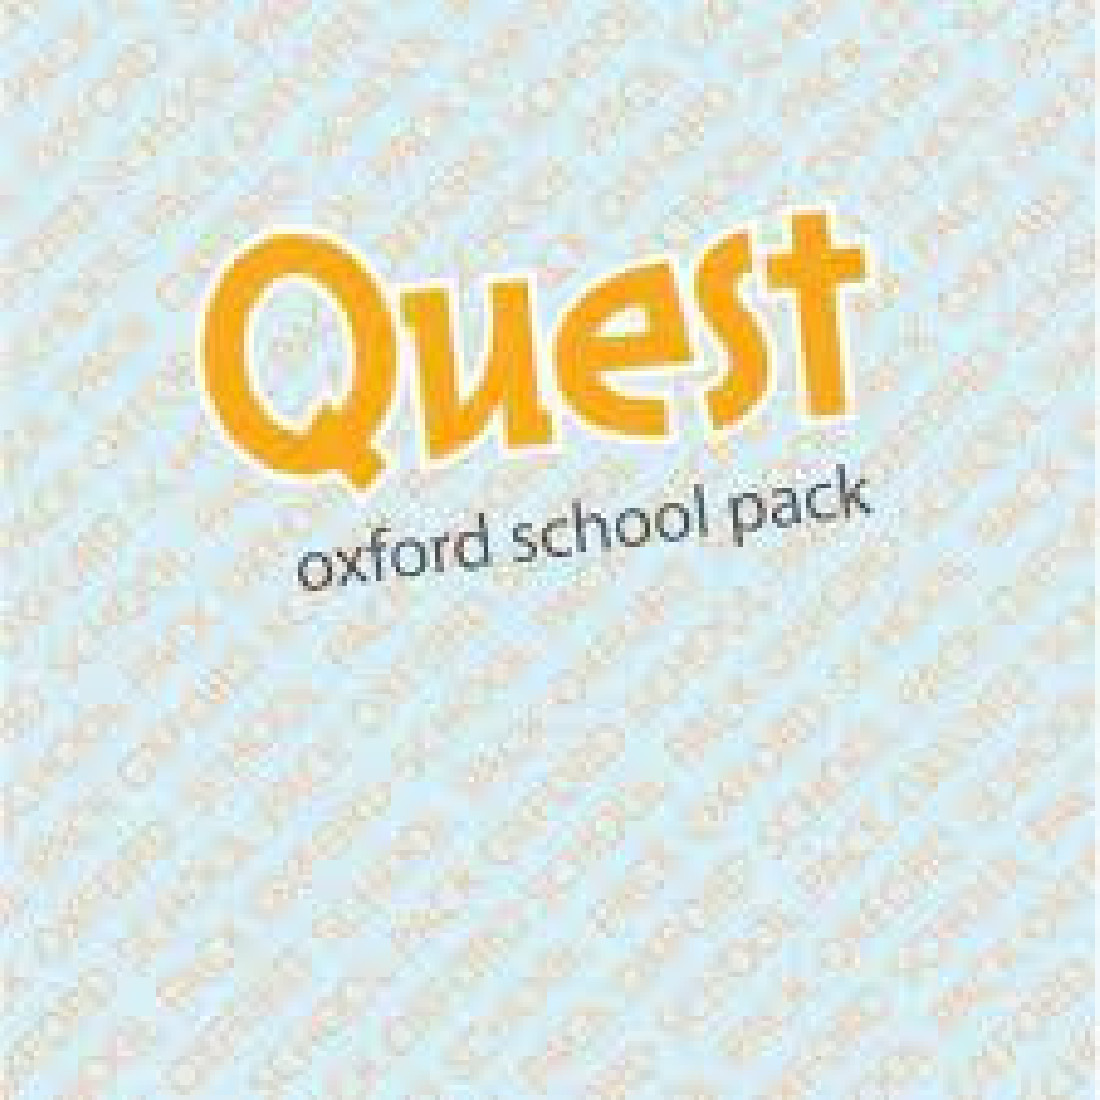 QUEST 2 TMA PACK - 05918